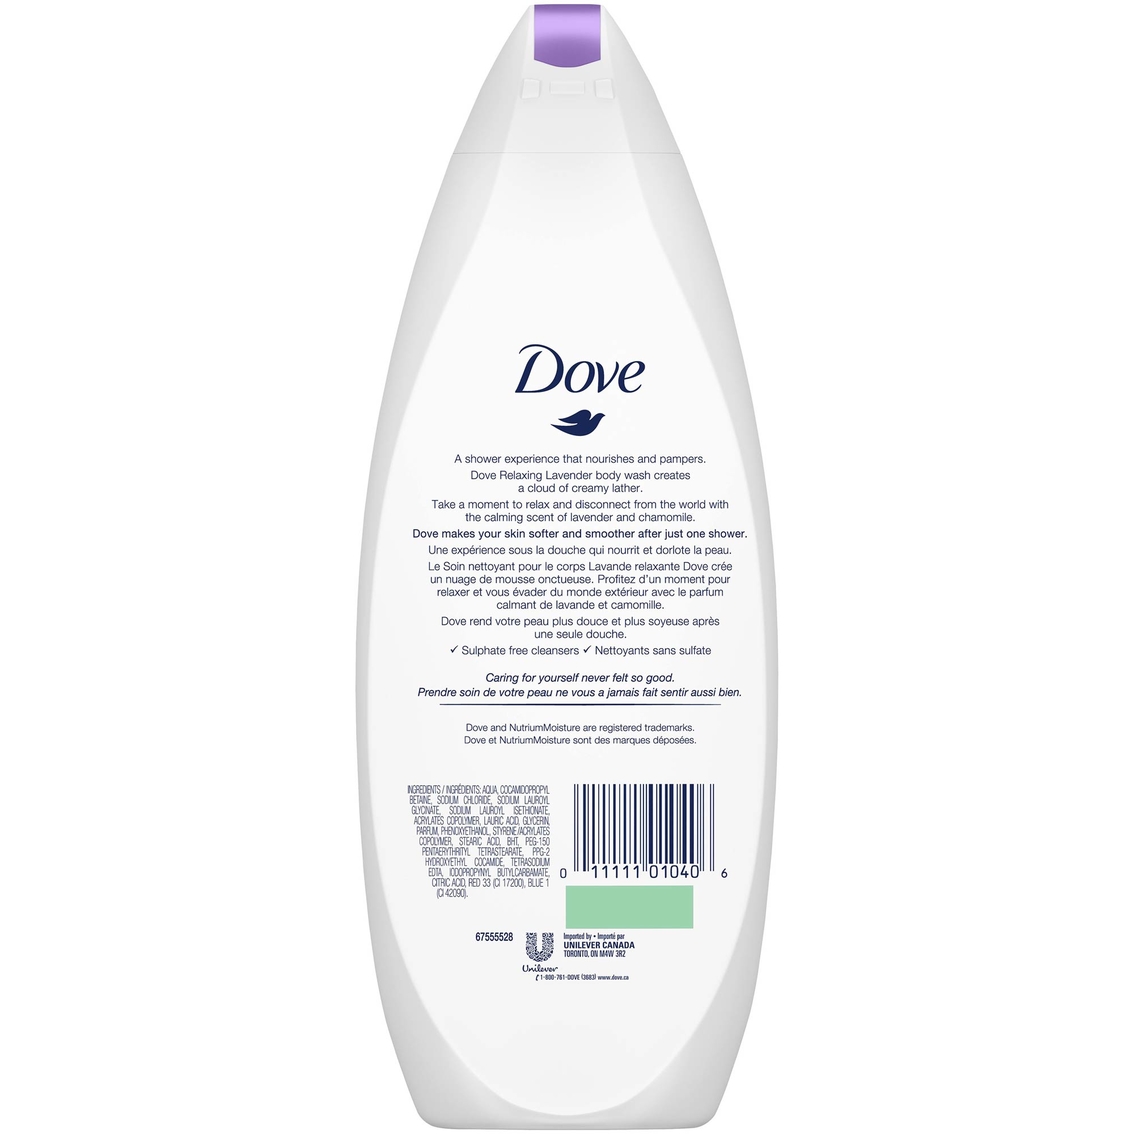 DOVE BODY WASH RELAXING LAVENDER 20oz - Image 2 of 2